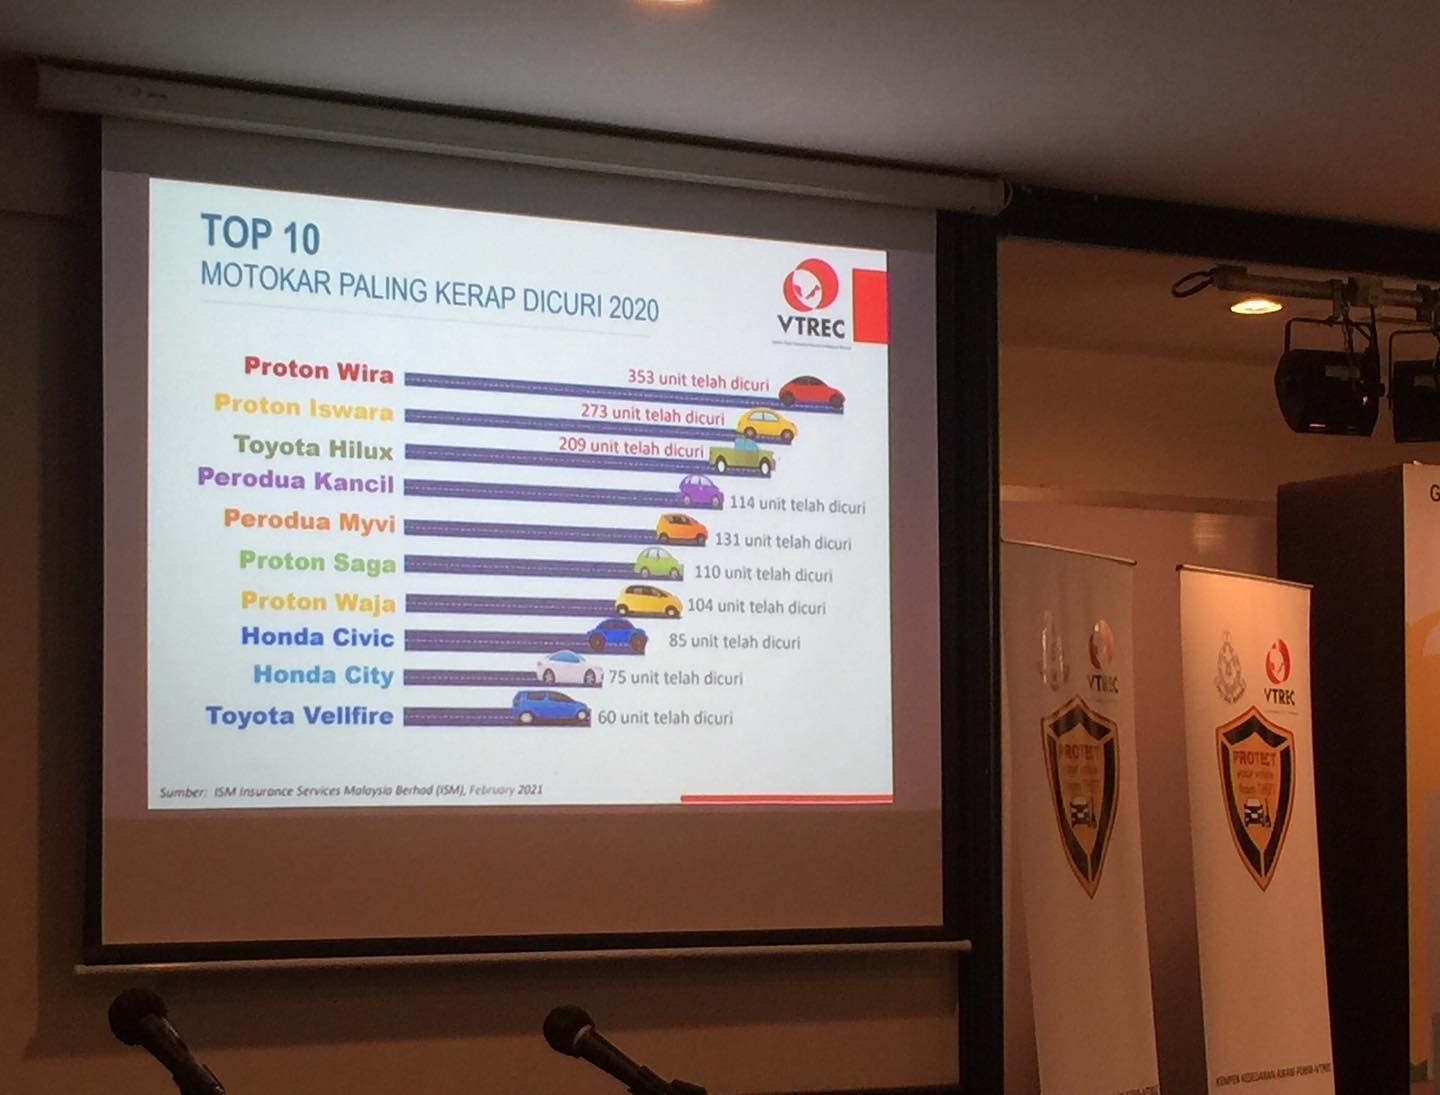 Malaysia's top 10 most stolen cars in 2020: guess who's #1?